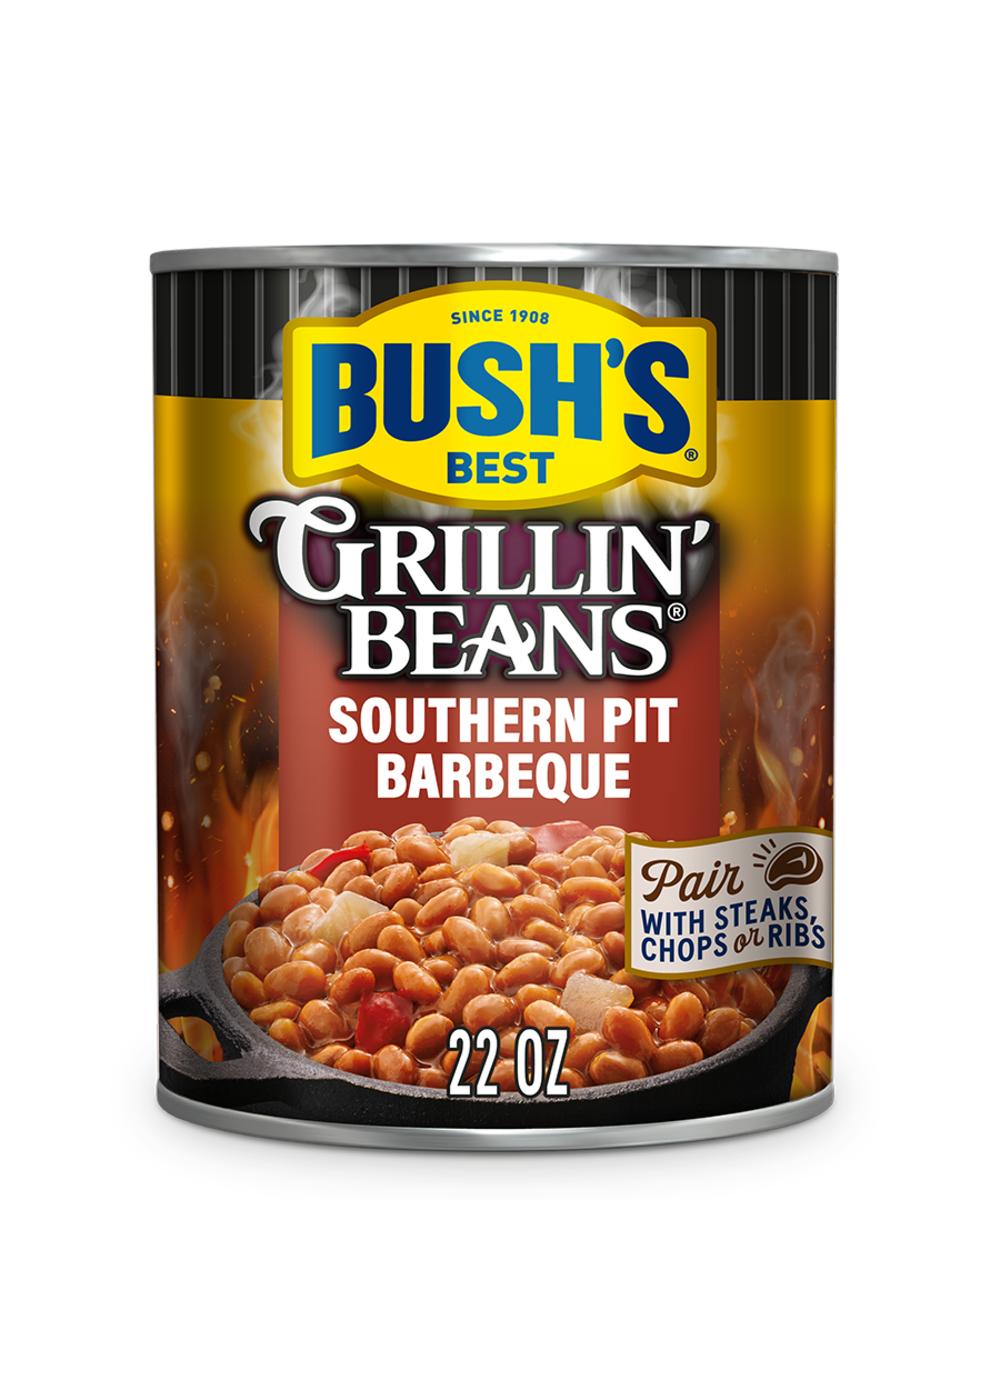 Bush's Best Southern Pit Barbecue Grillin' Beans; image 1 of 3